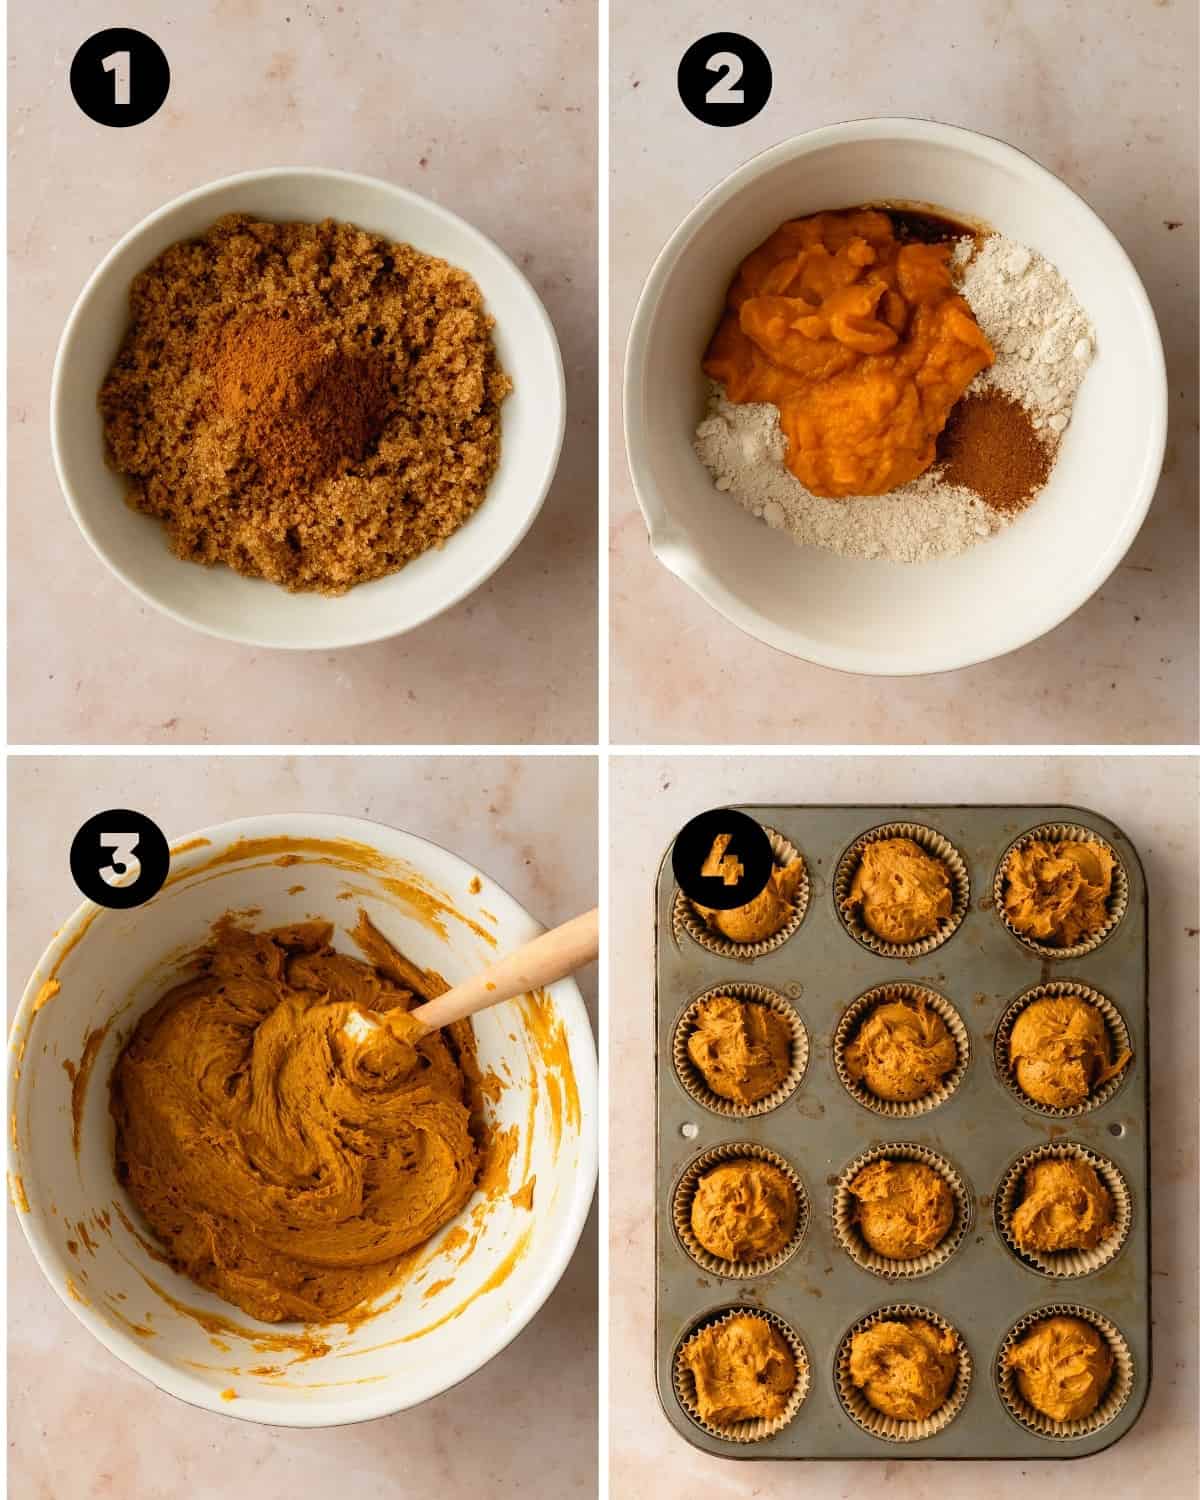 Pumpkin Muffins from Cake Mix Recipe steps 1-4. Mixing the topping, mizing the muffins and scooping the muffins into the pan.